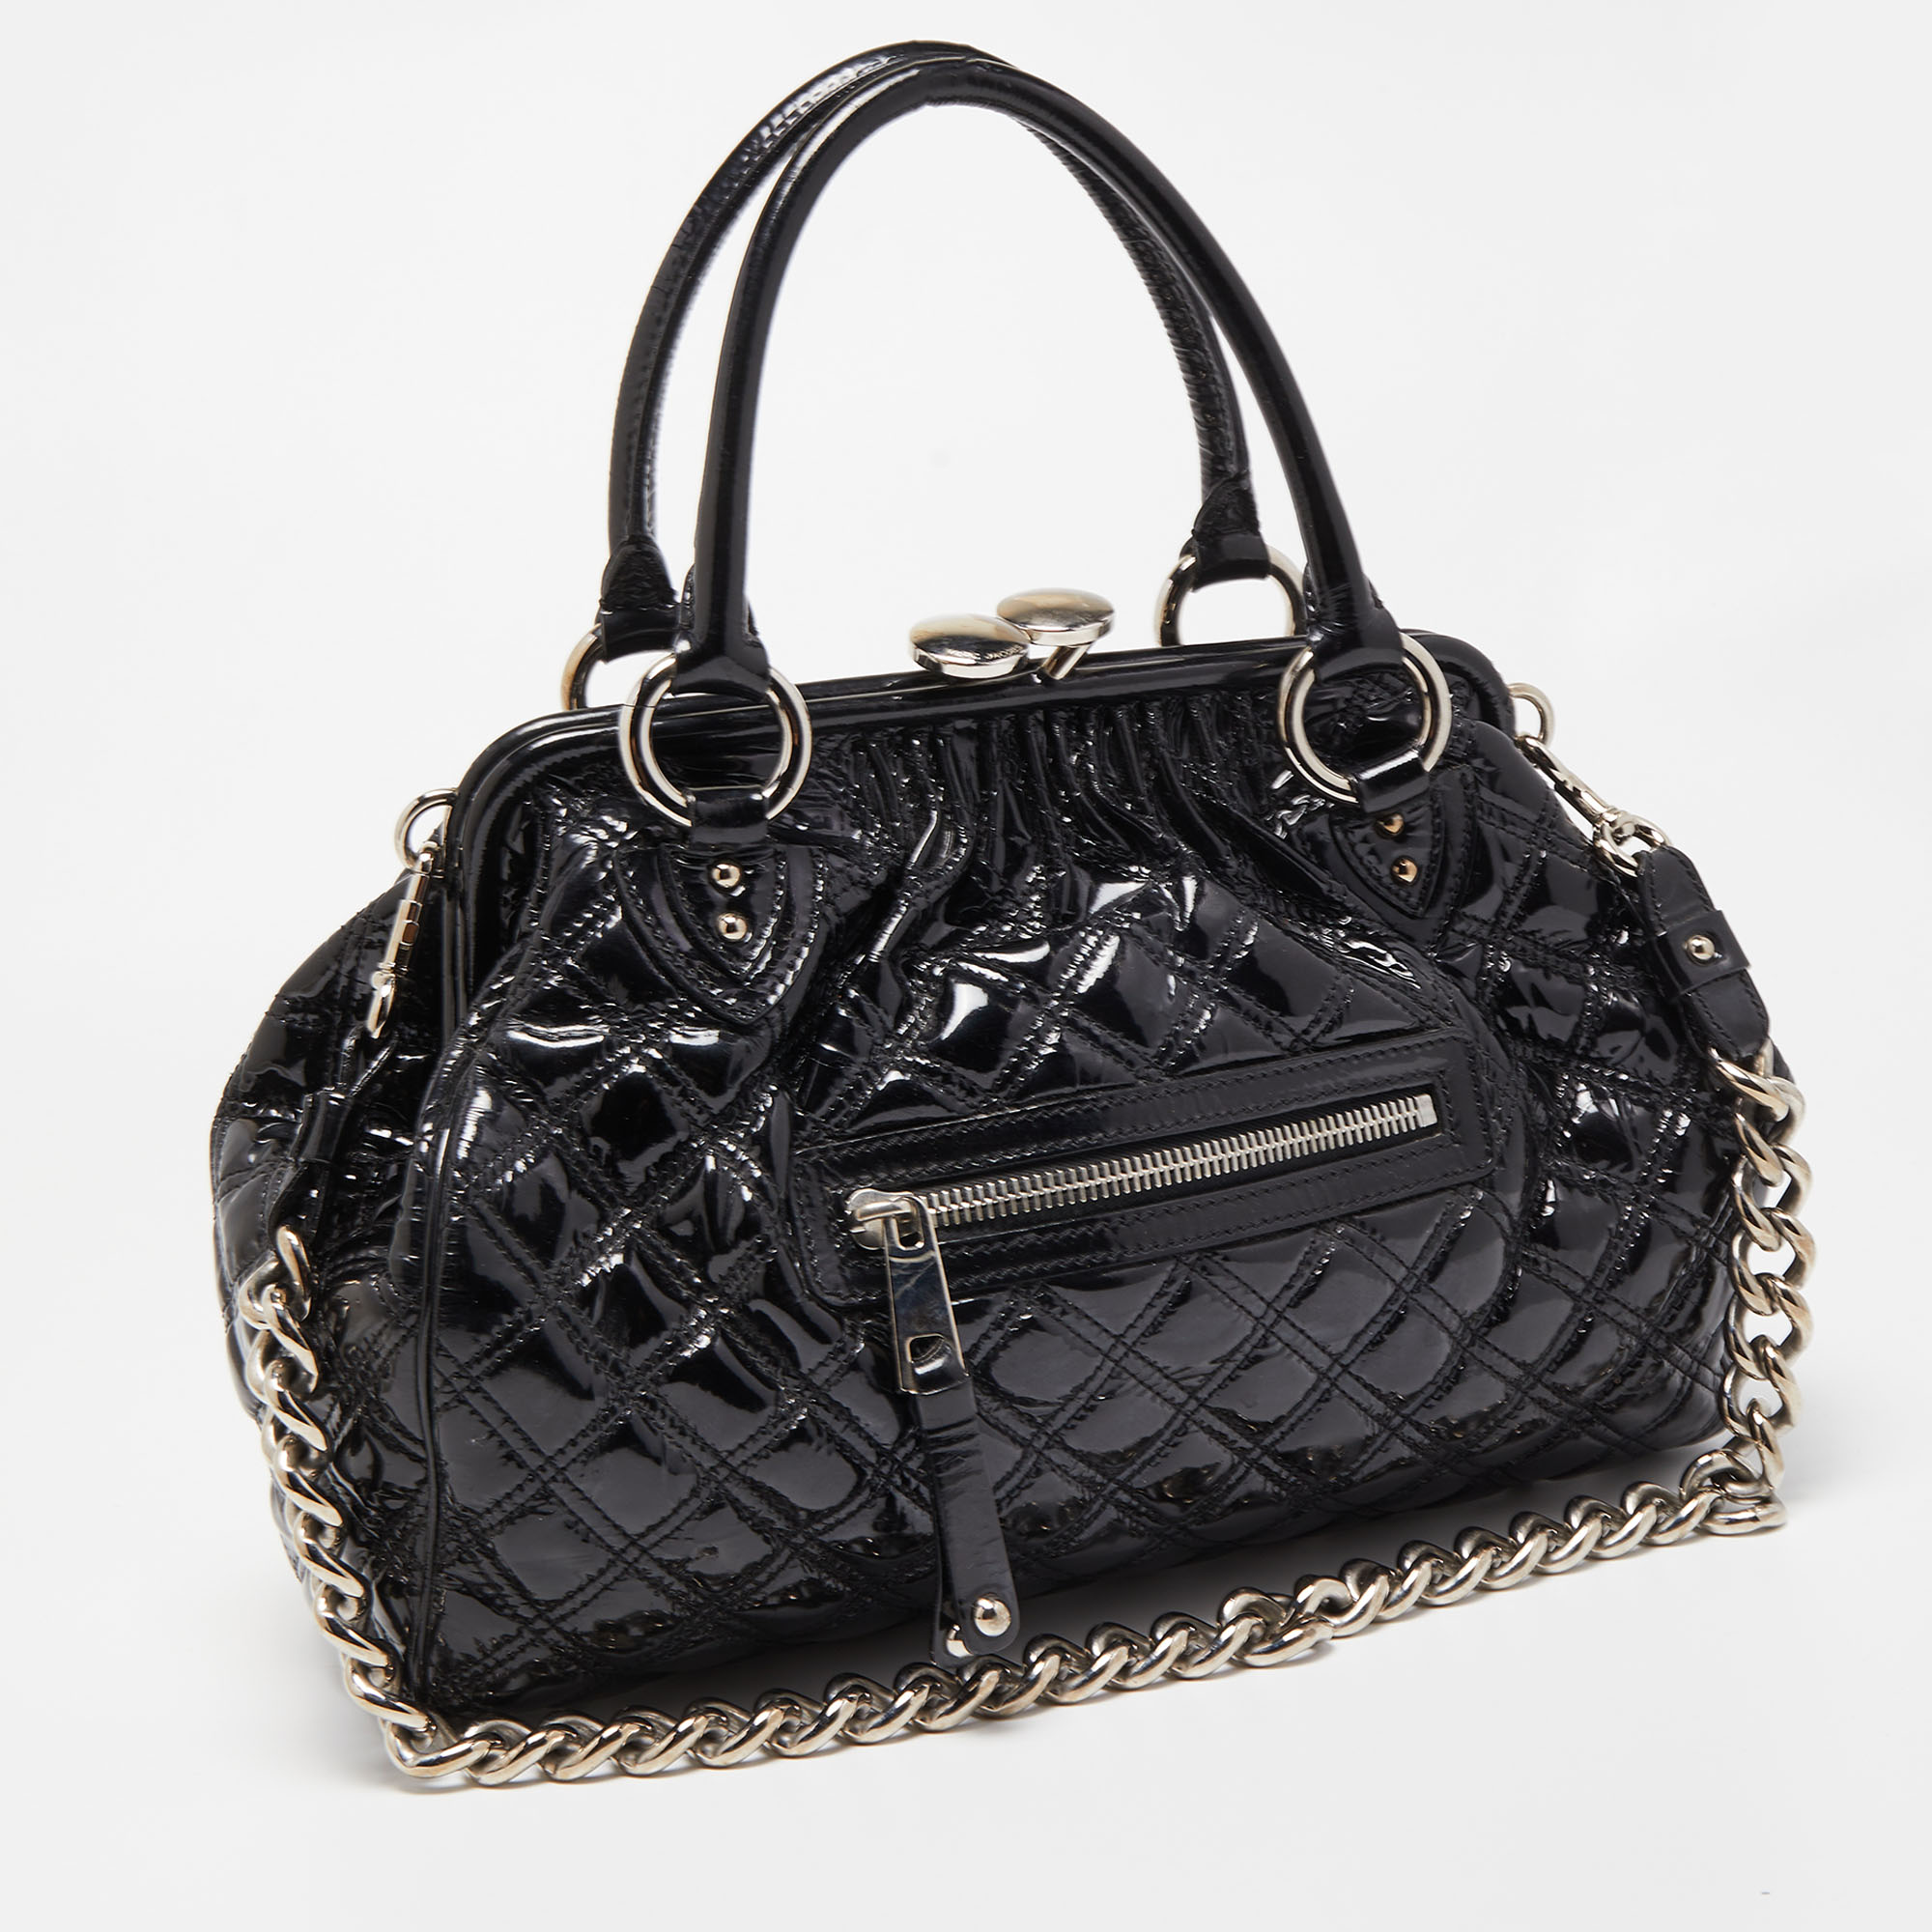 Marc Jacobs Black Quilted Patent Leather Stam Satchel